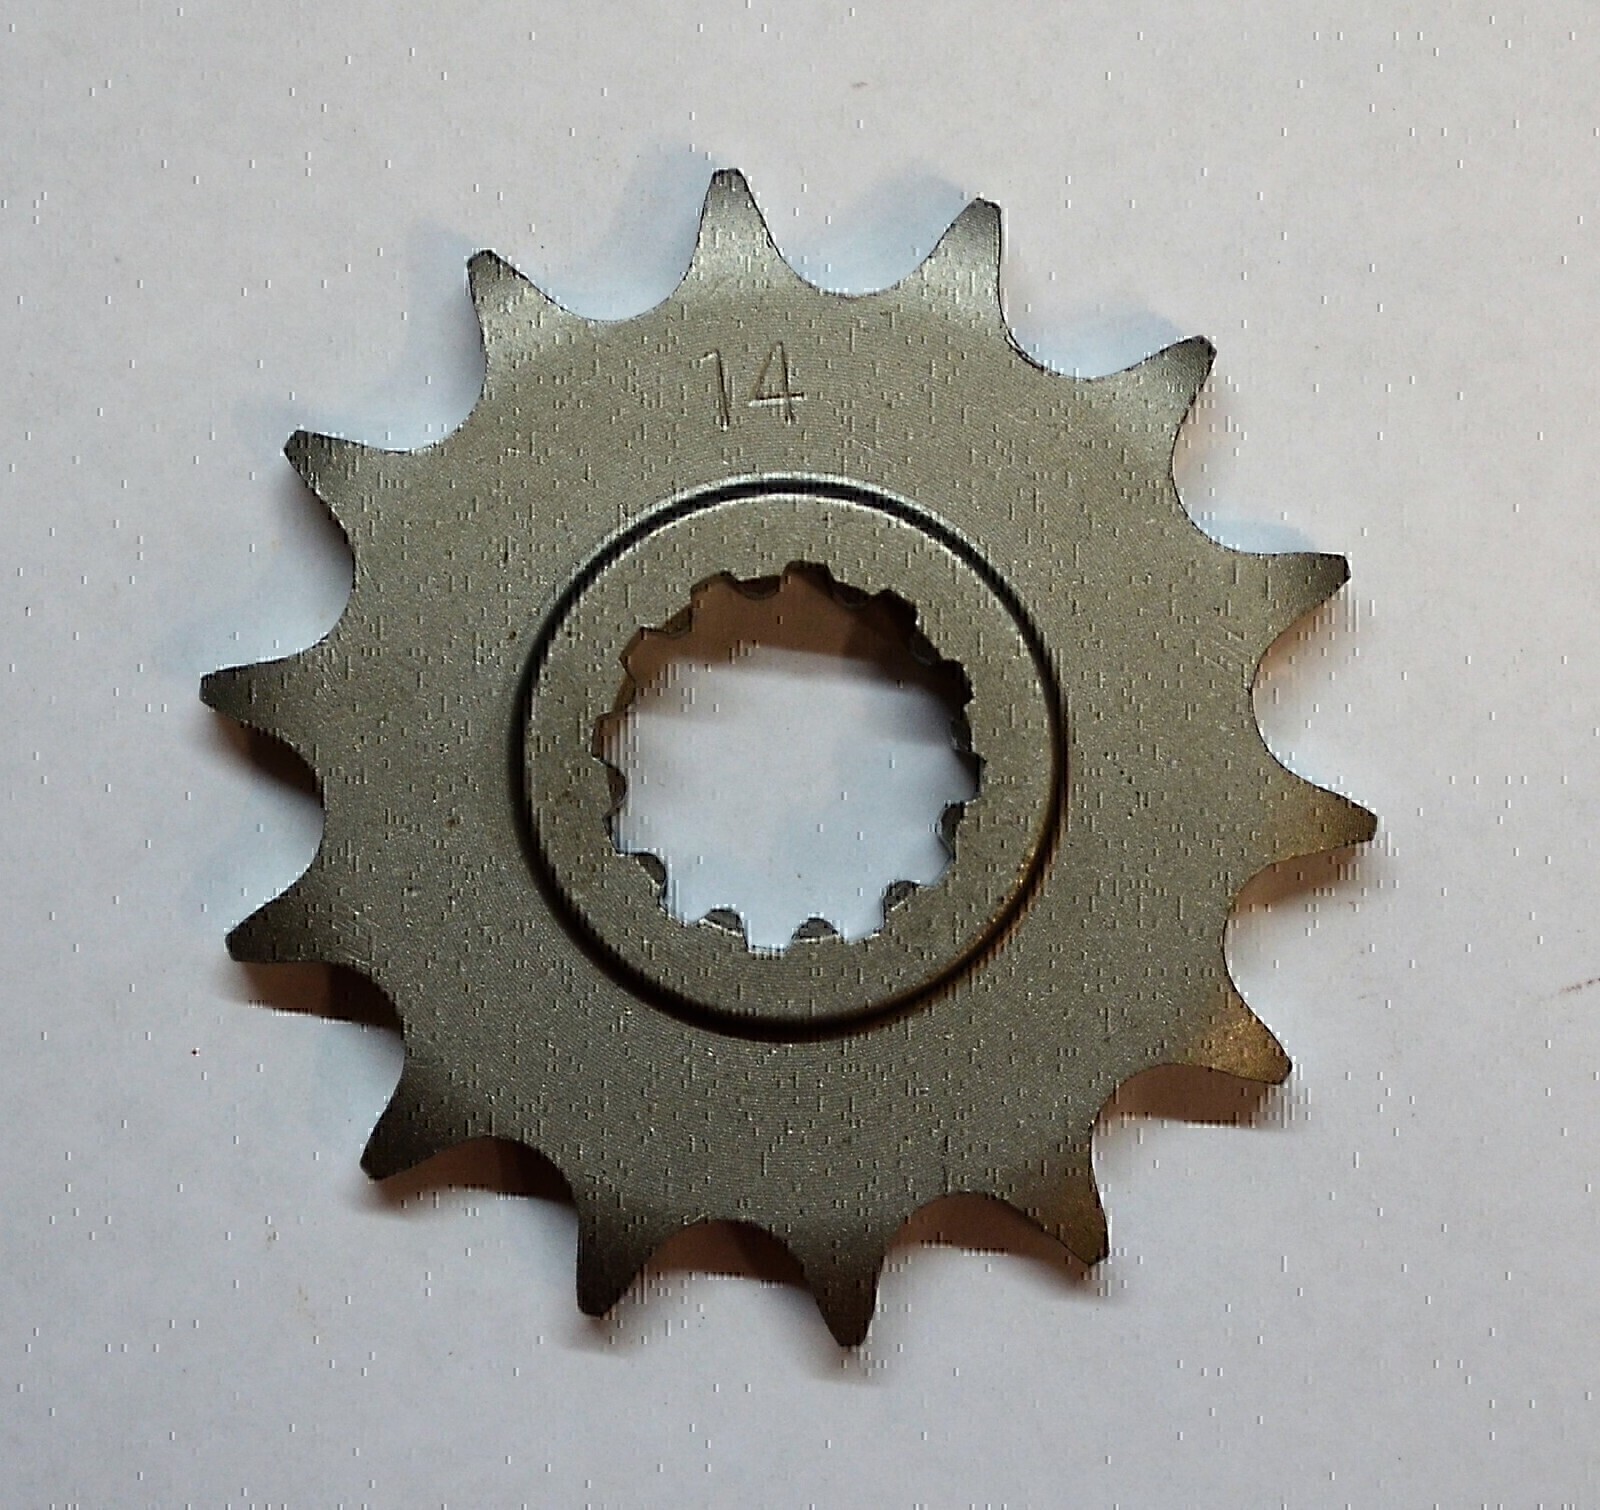 12 TOOTH FRONT SPROCKET FOR KAWASAKI 12T KX125 1996 - 2007